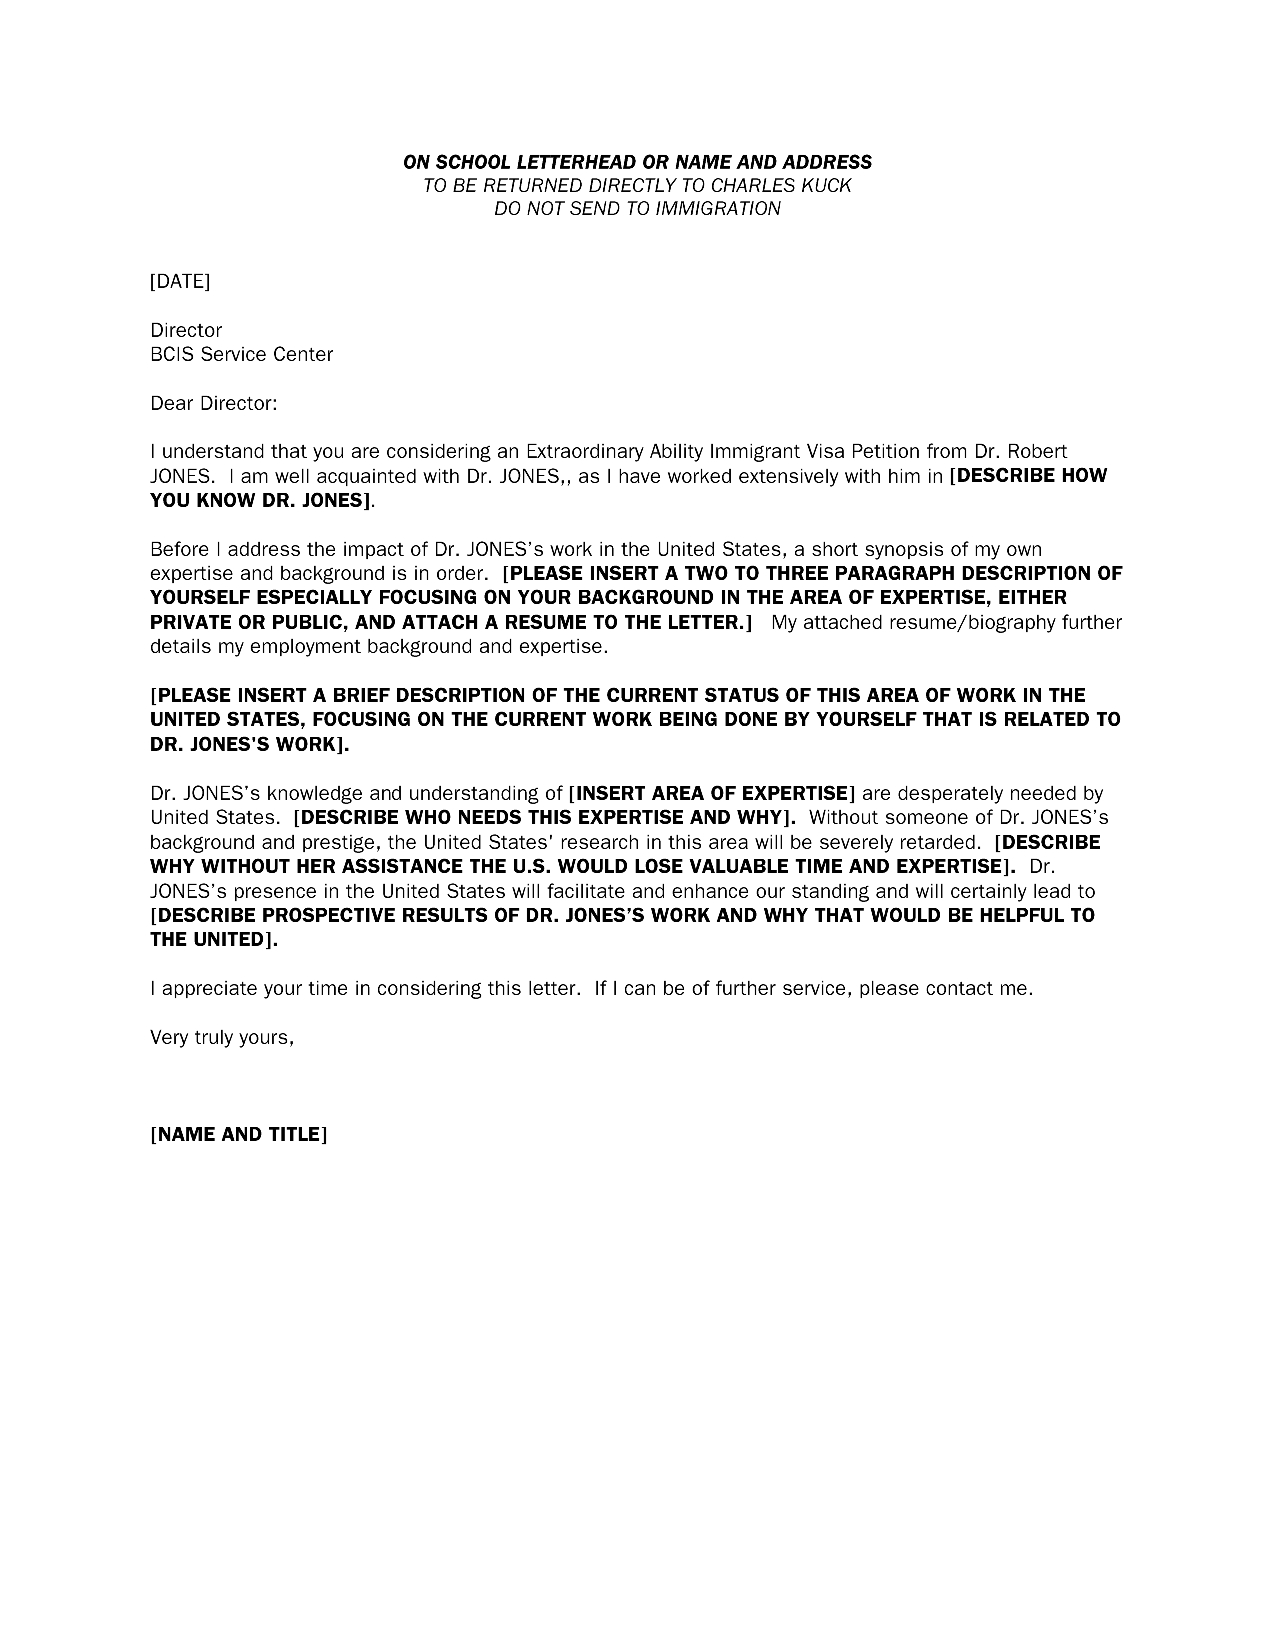 immigration recommendation letter template Collection-Personal Re mendation Letter Sample For Immigration Neuer Adoptive Parents Best Solutions Samples With 16-e